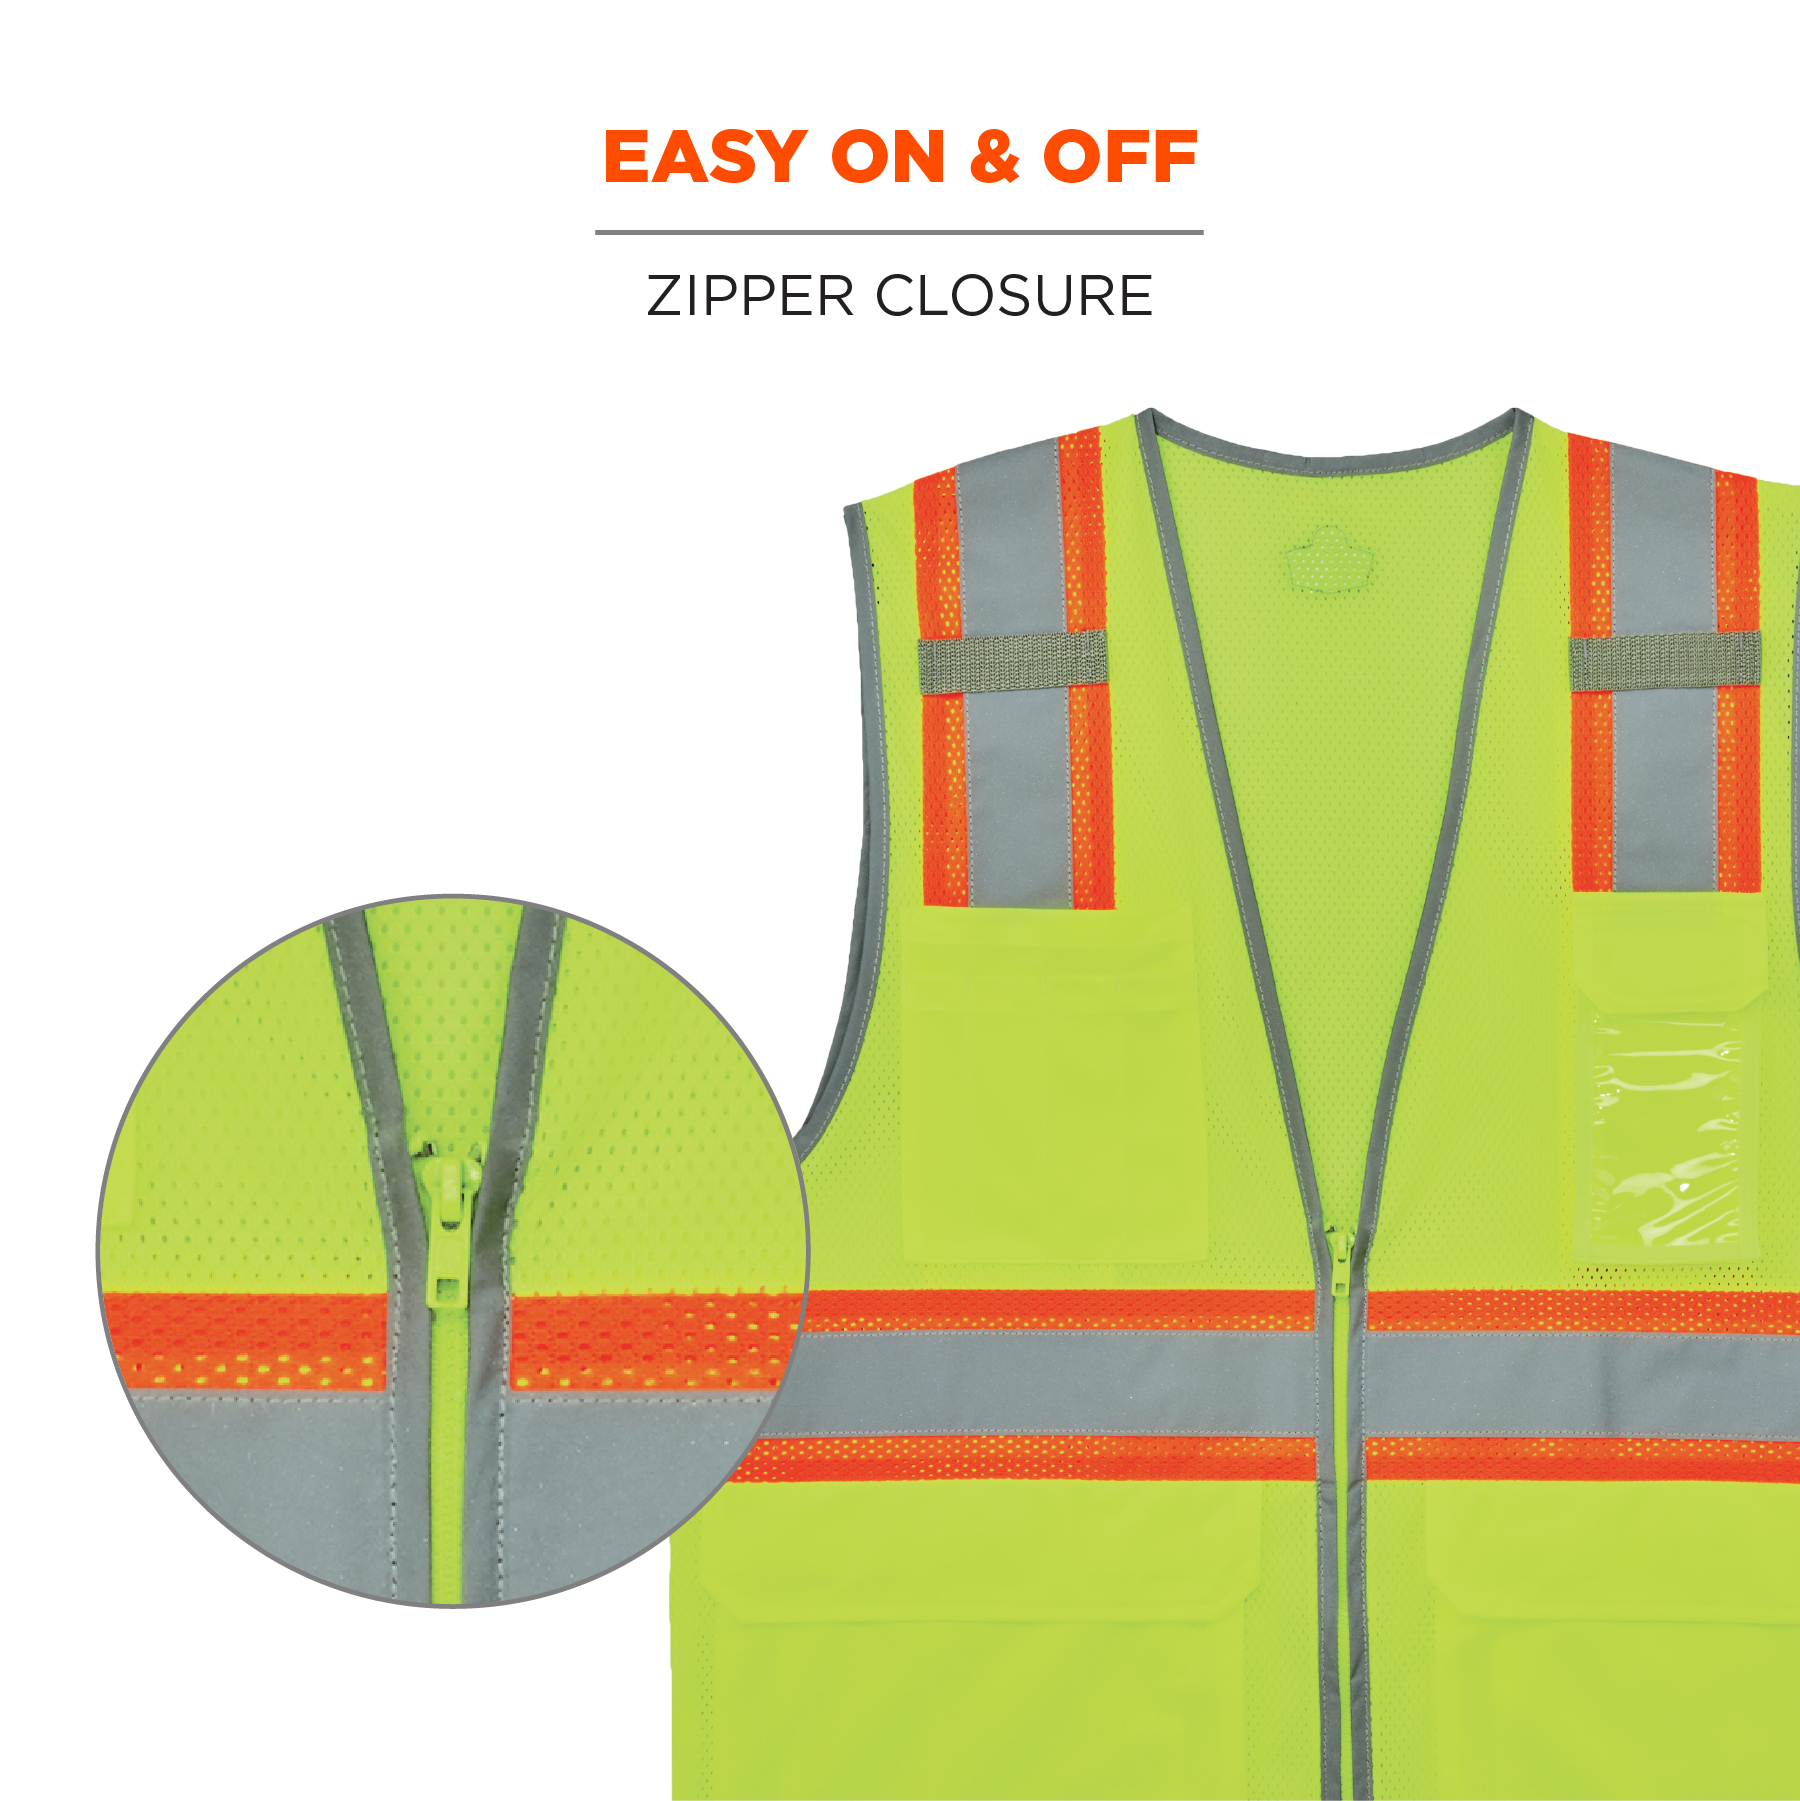 Reflective w/Orange Binding Neon Green ANSI/ISEA Class 2 3C Products SV2300 Zipper Safety Tricot/Mesh Vest Pockets 